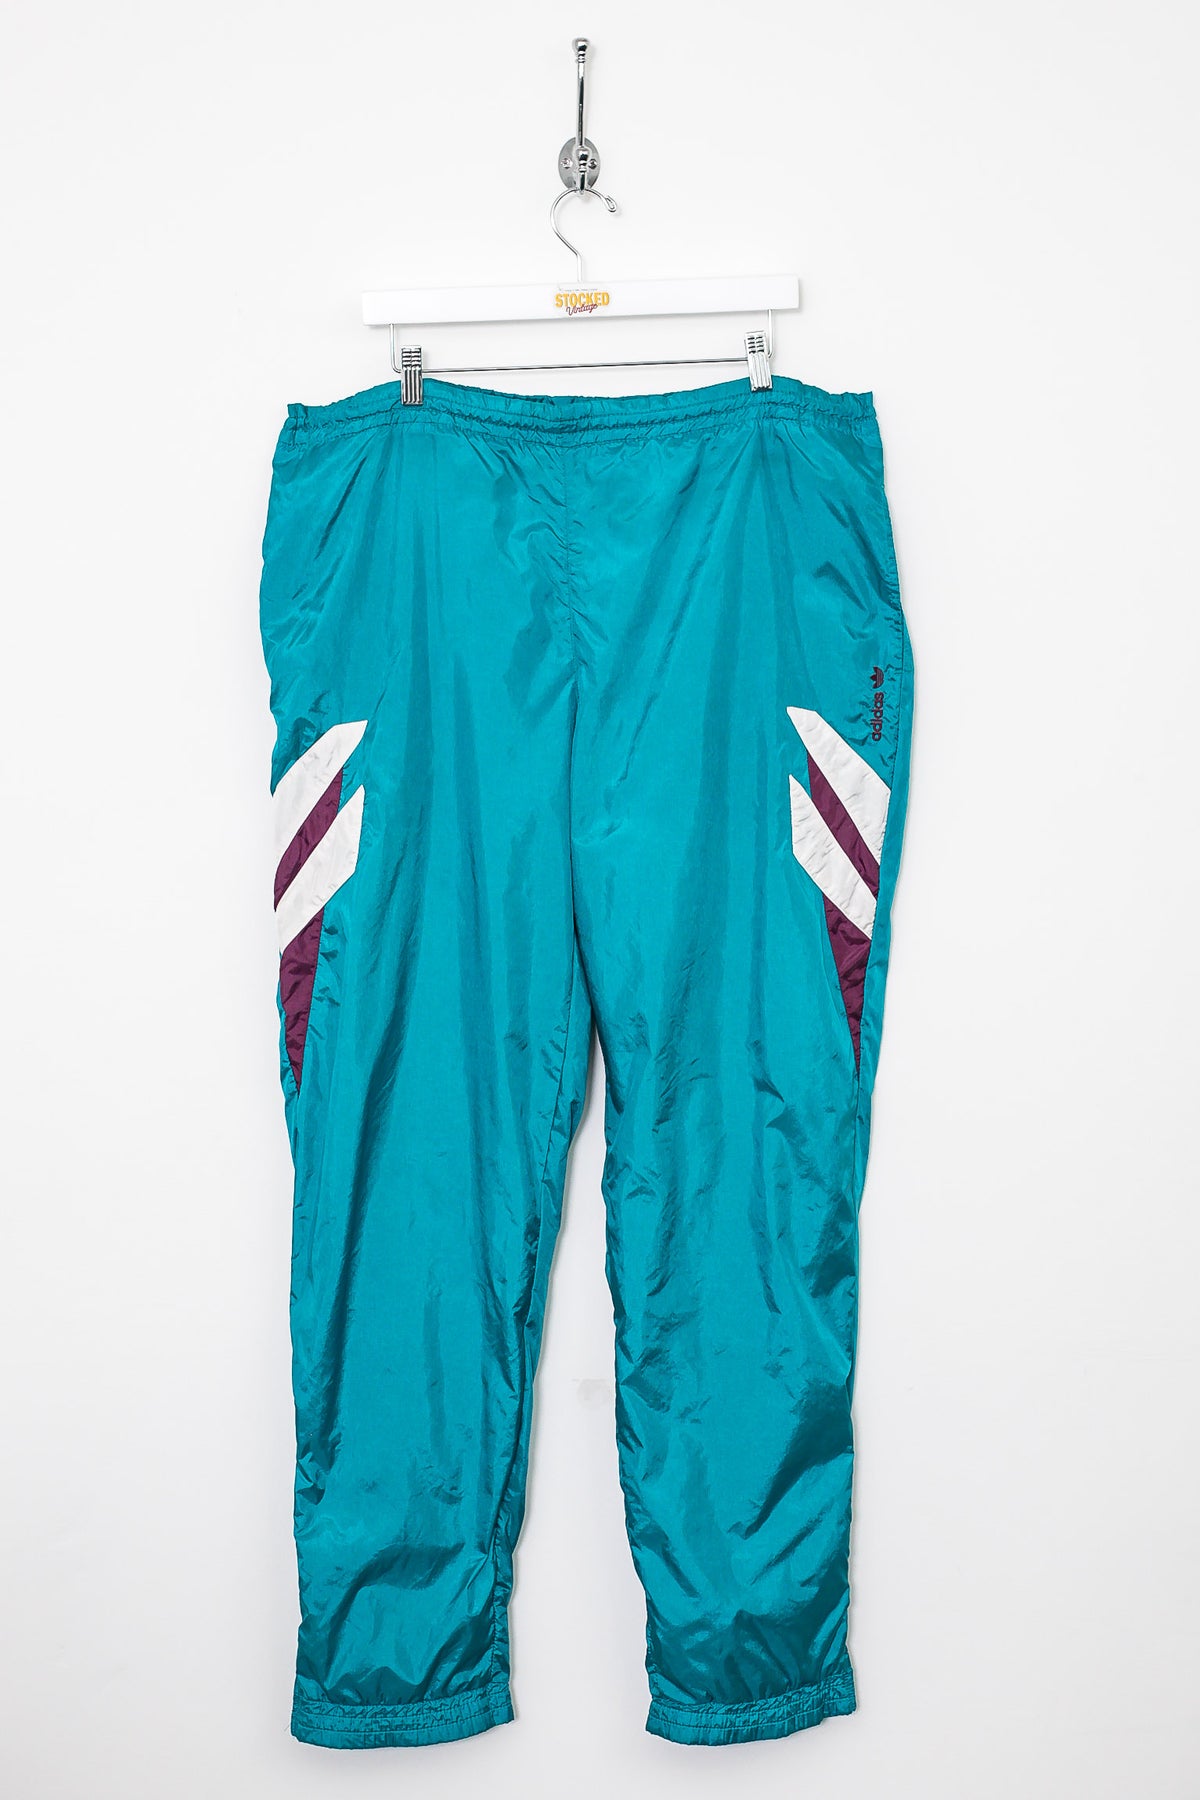 90s Adidas Tracksuit Bottoms (XL)